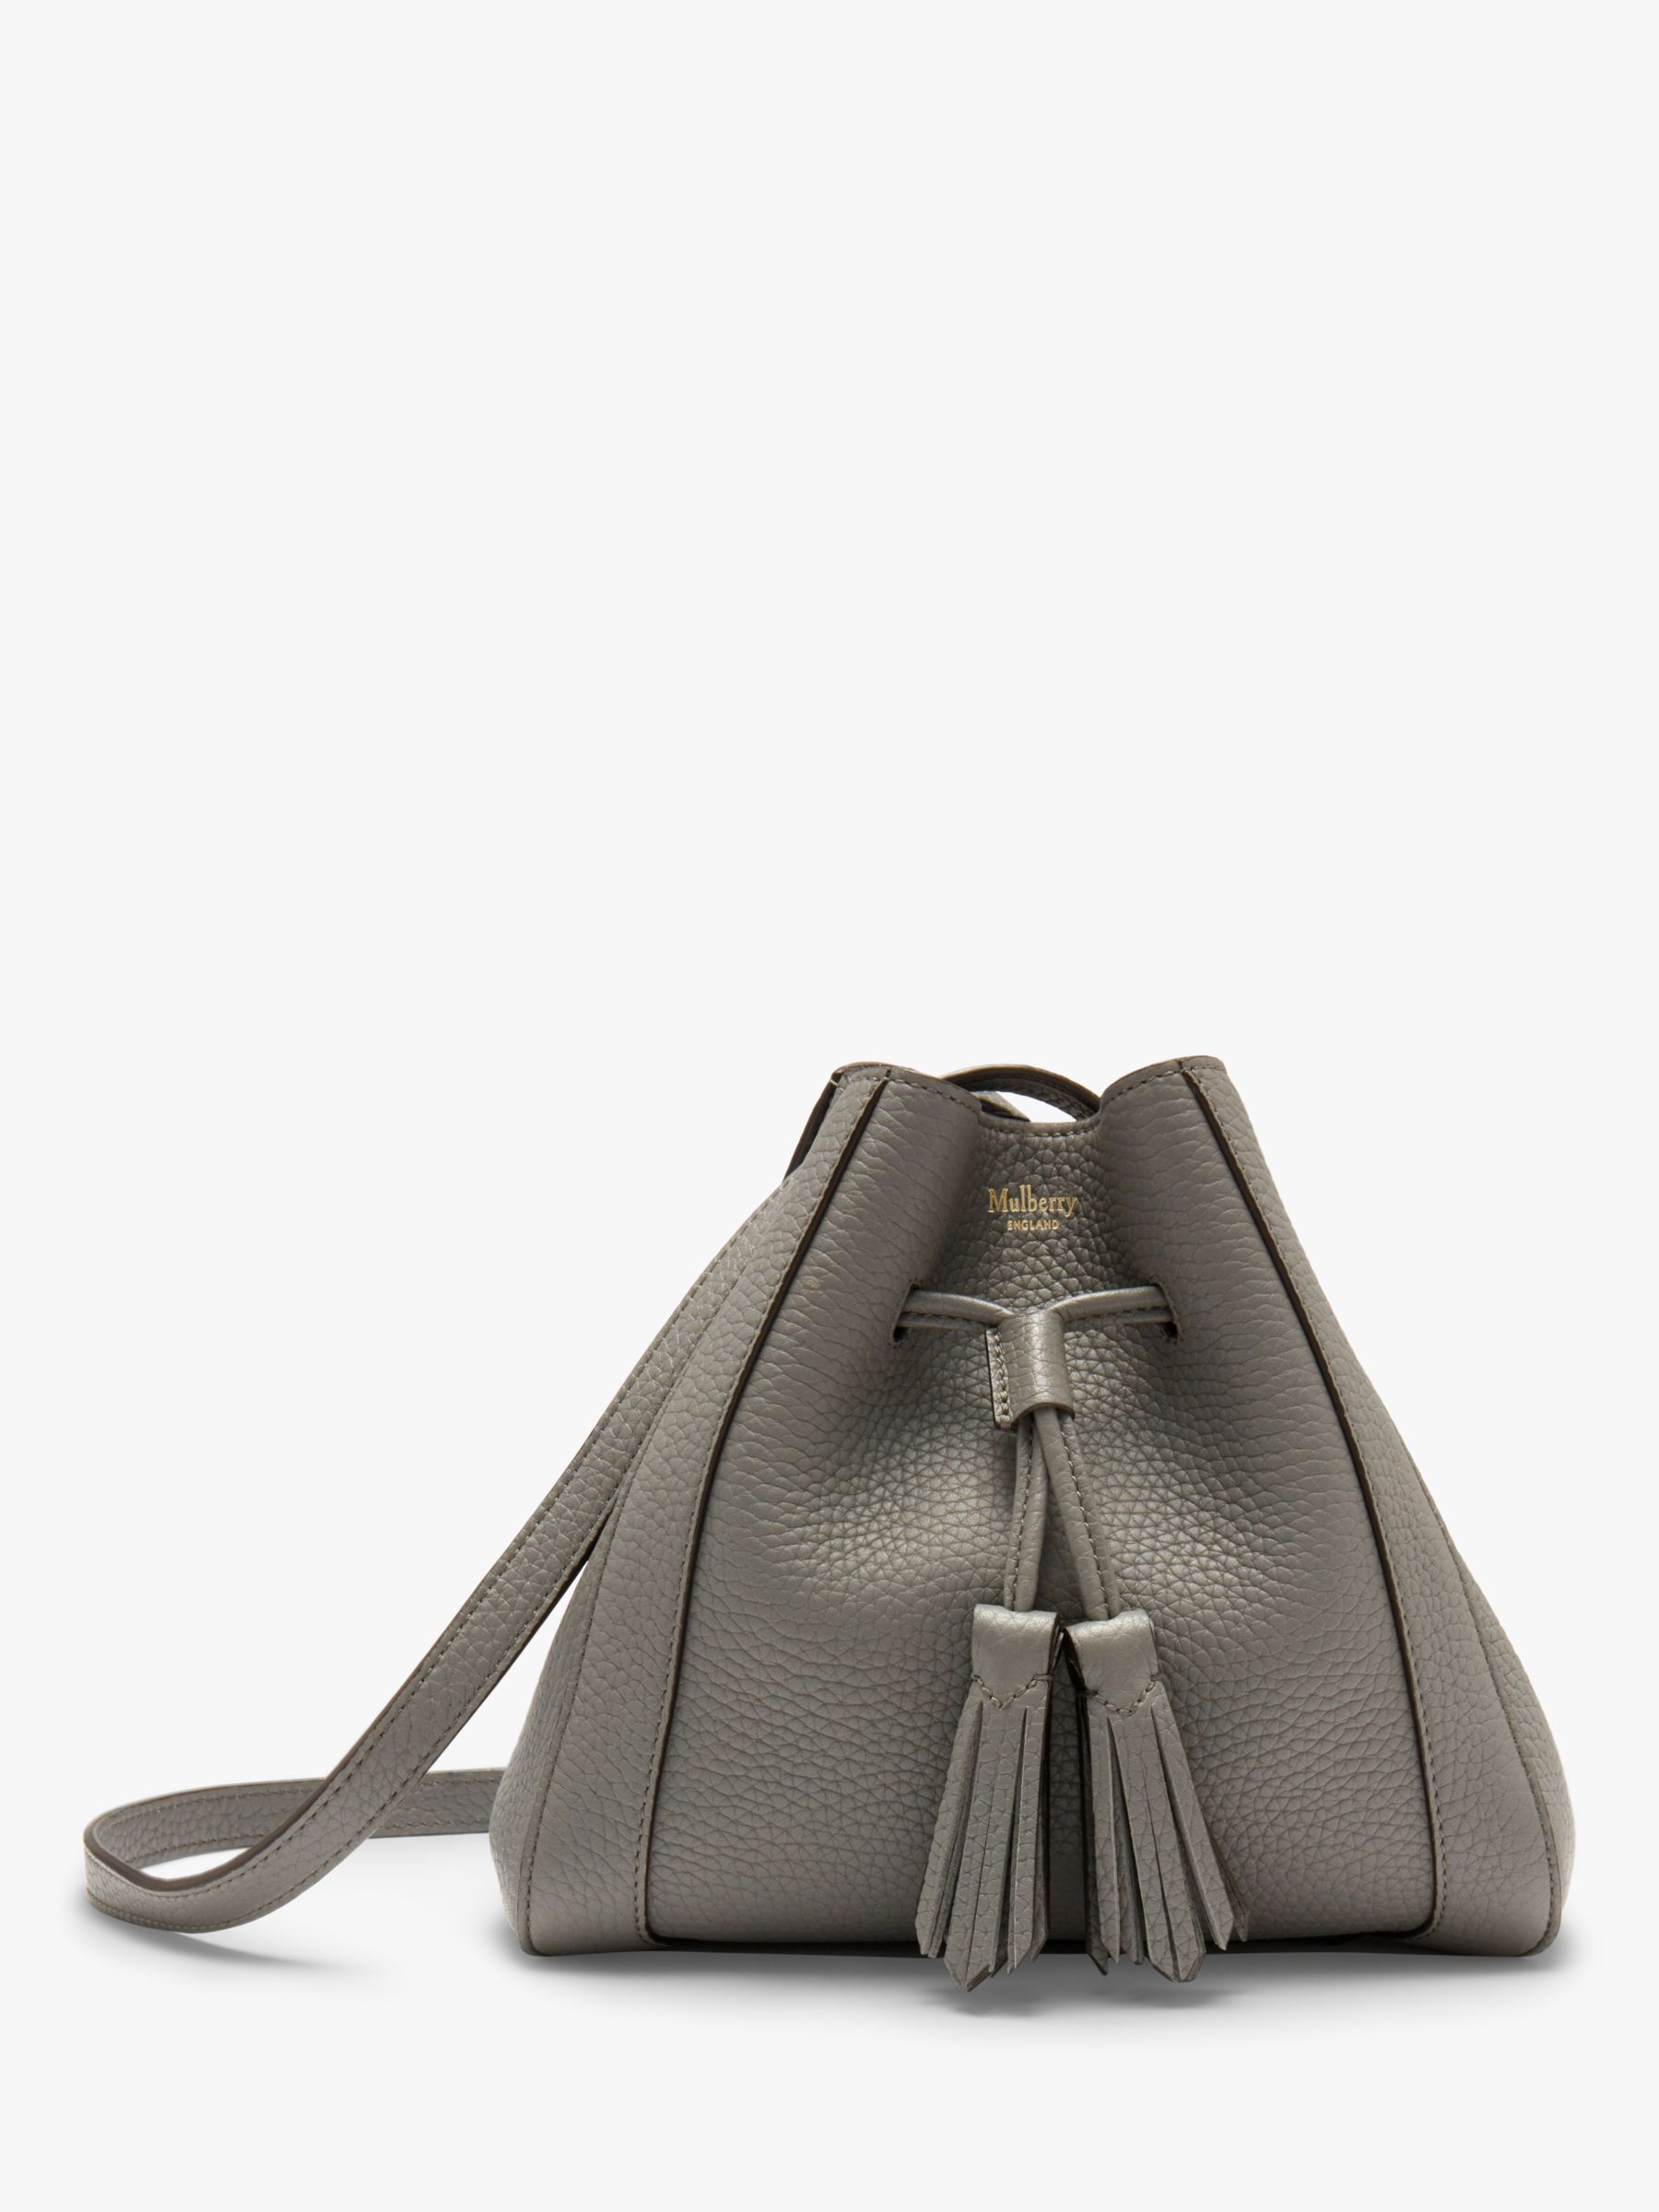 Mulberry Mini Millie Heavy Grain Leather Tote Bag, Charcoal